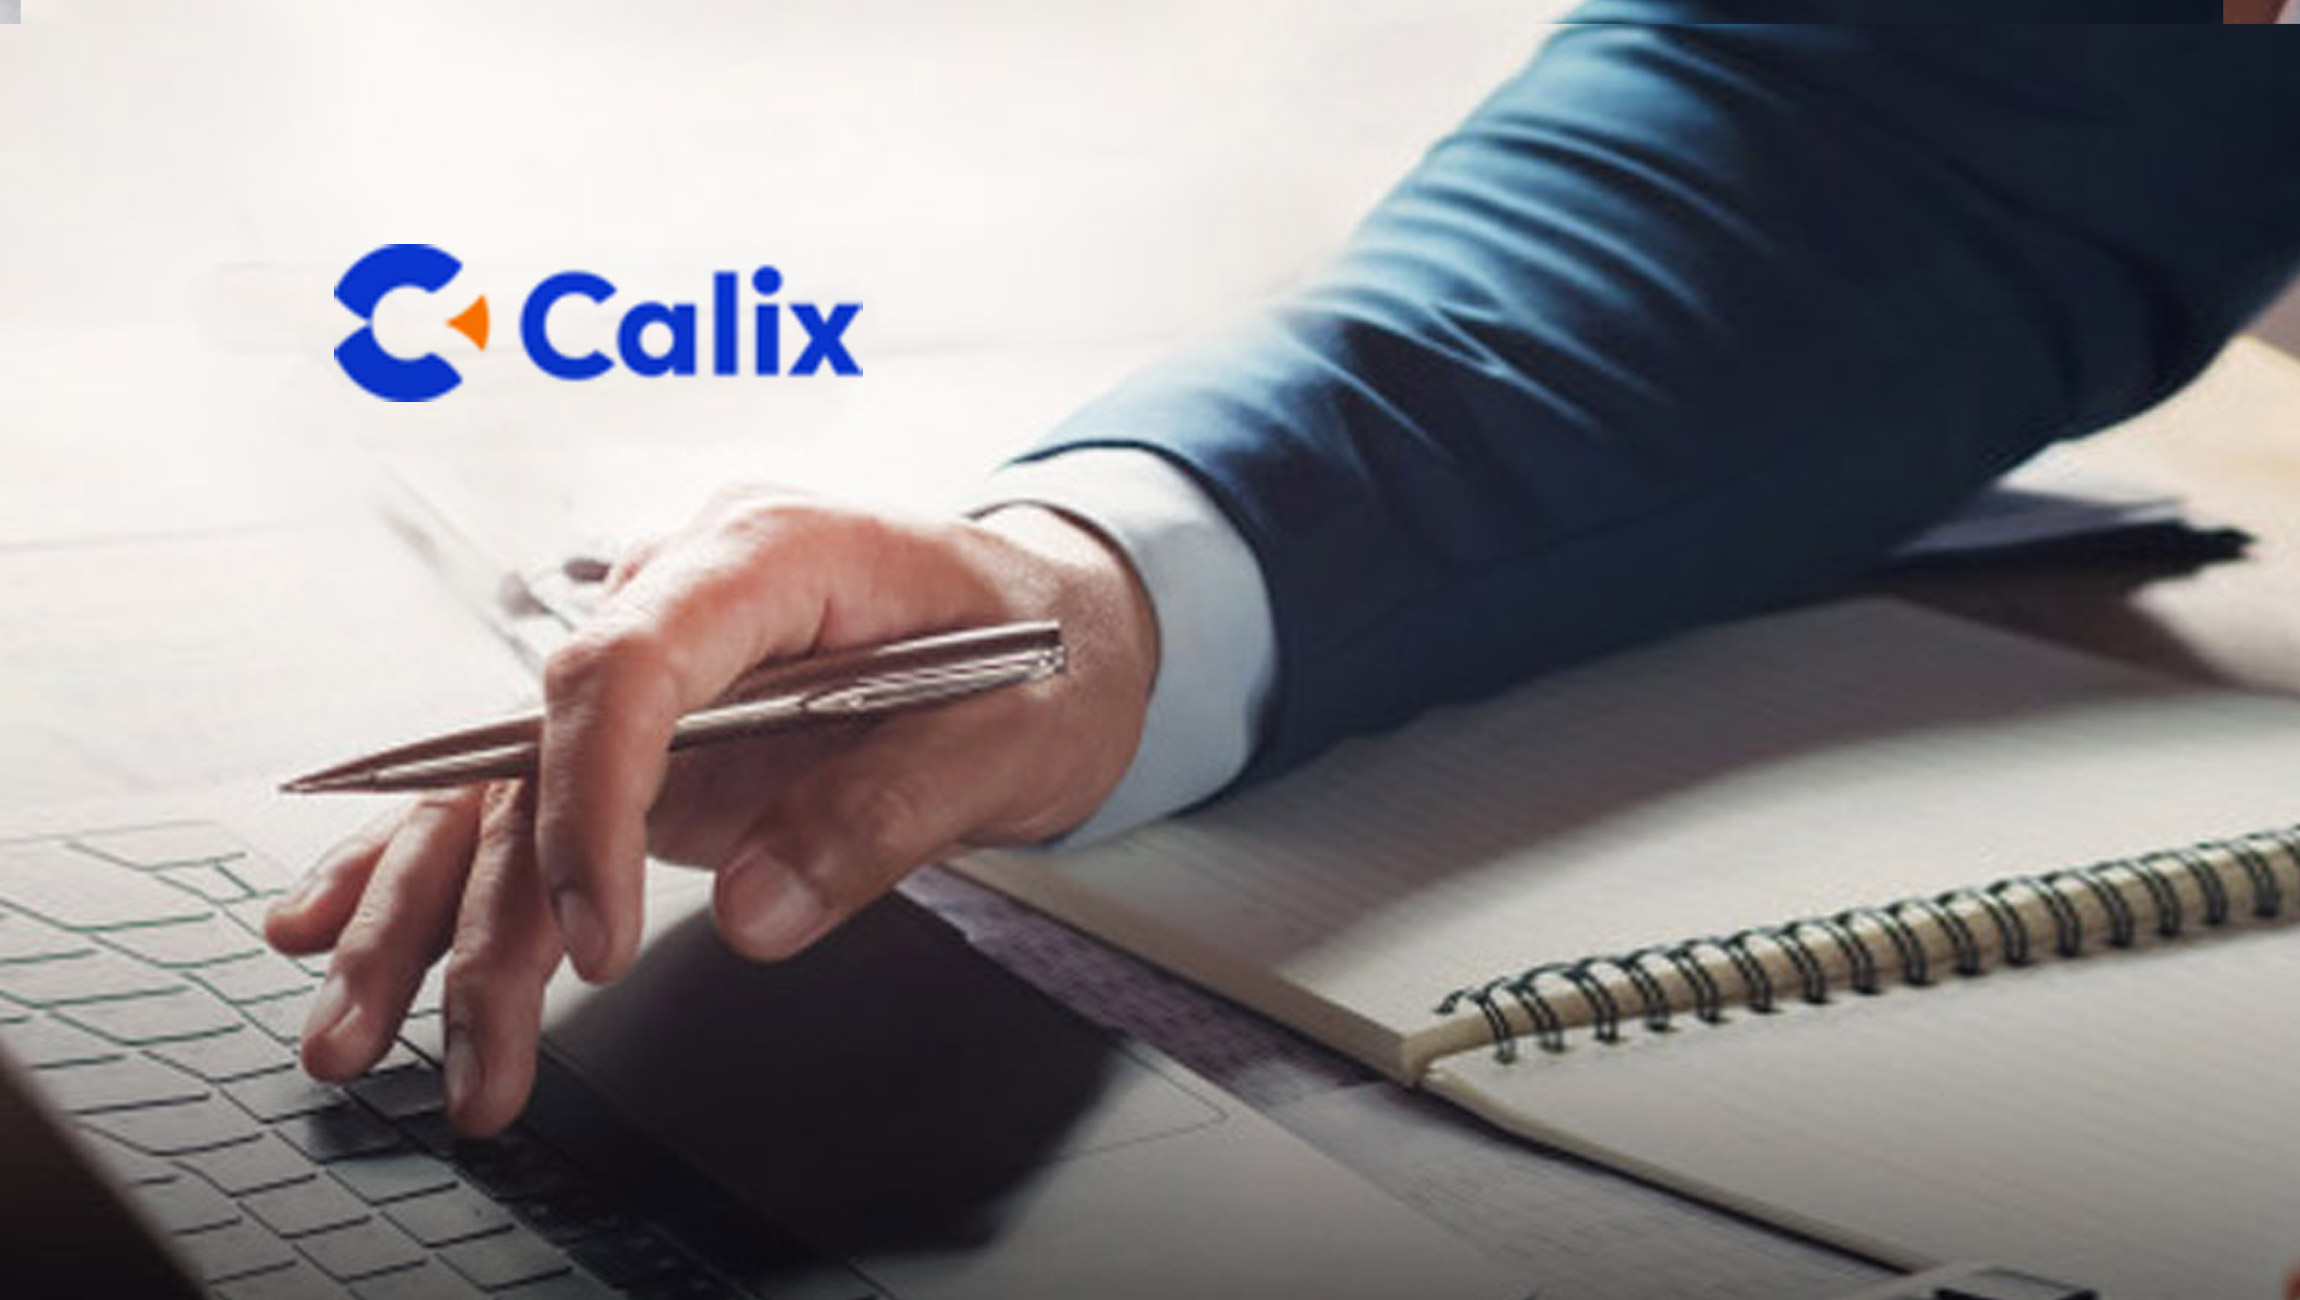 Calix Taps Transformational Customer Success Leader Martha Galley To Helm New Corporate Social Responsibility Office and Drive ESG Initiatives